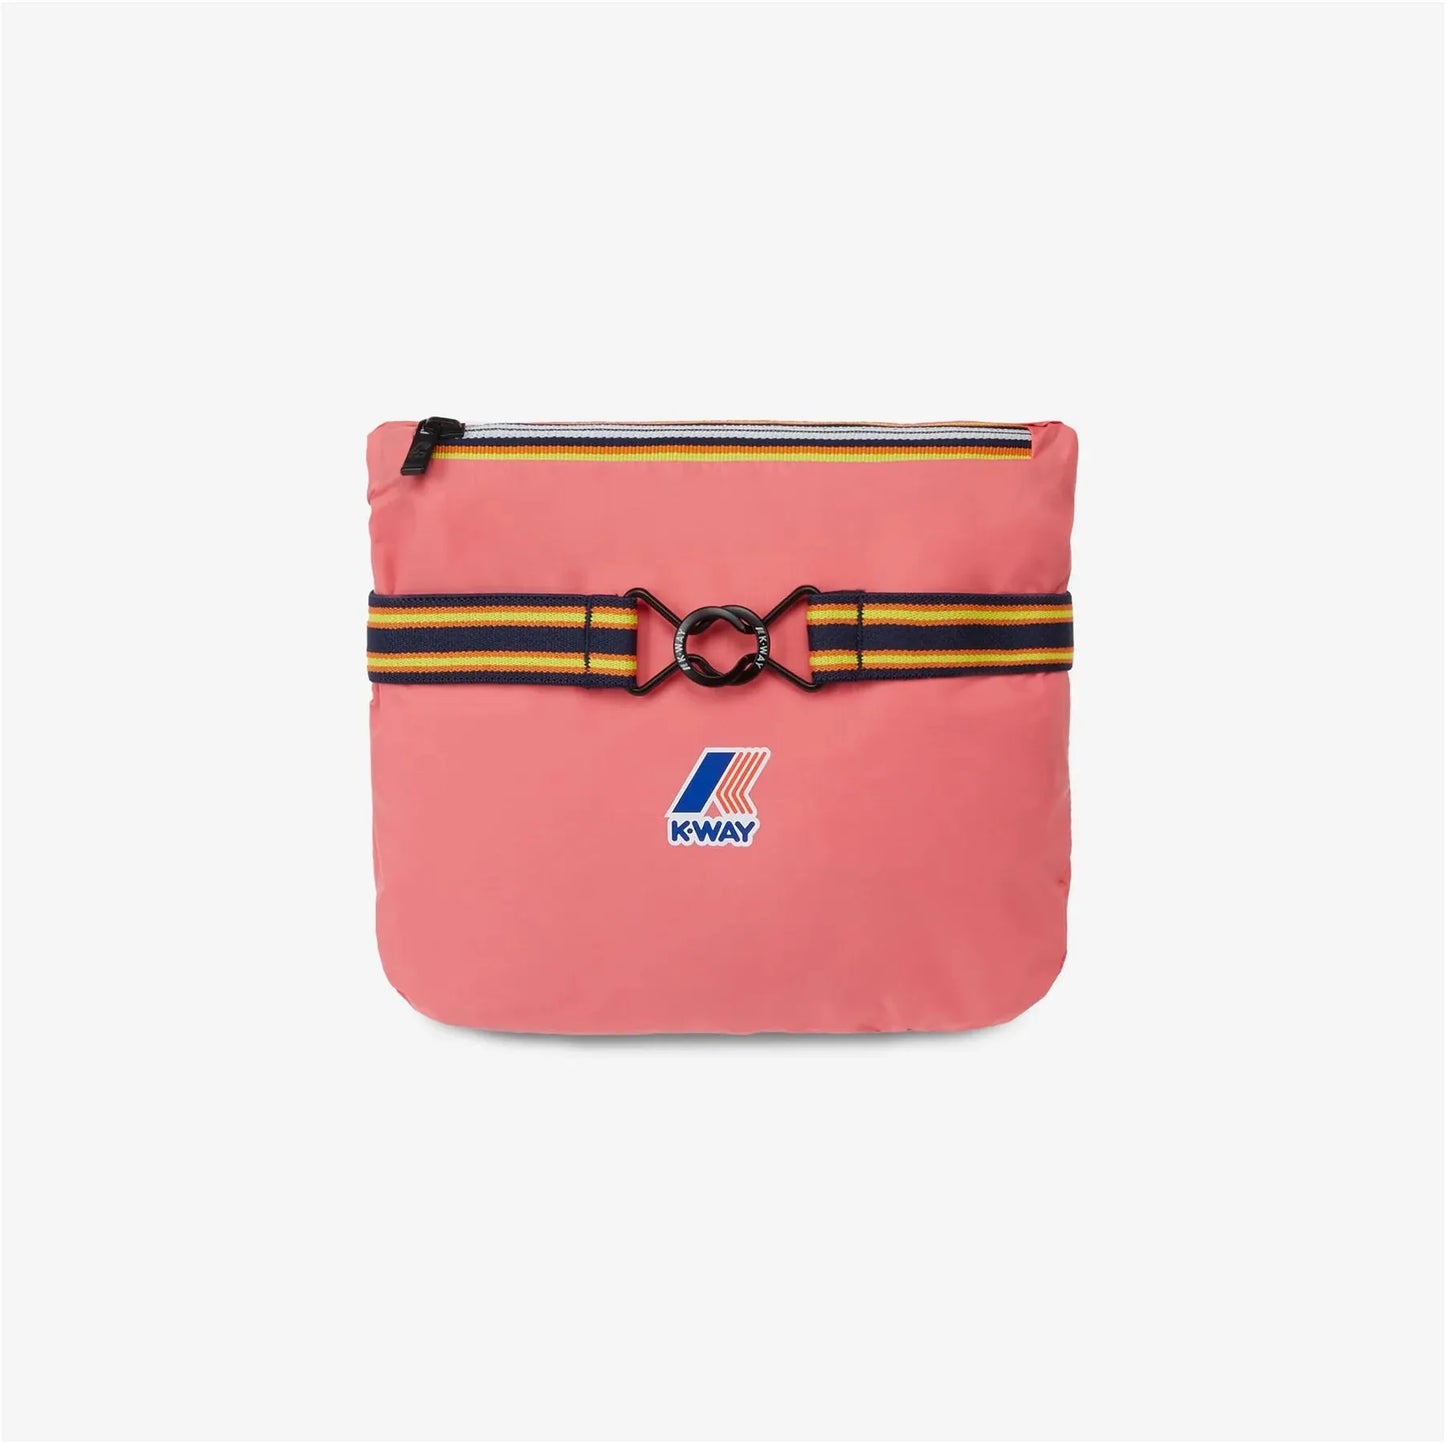 Le Vrai 3.0 Claude crossbody bag in Pink MD by K-Way, with a front logo, a yellow and blue stripe, and a metal clasp, crafted from breathable ripstop fabric, displayed on a plain white background.